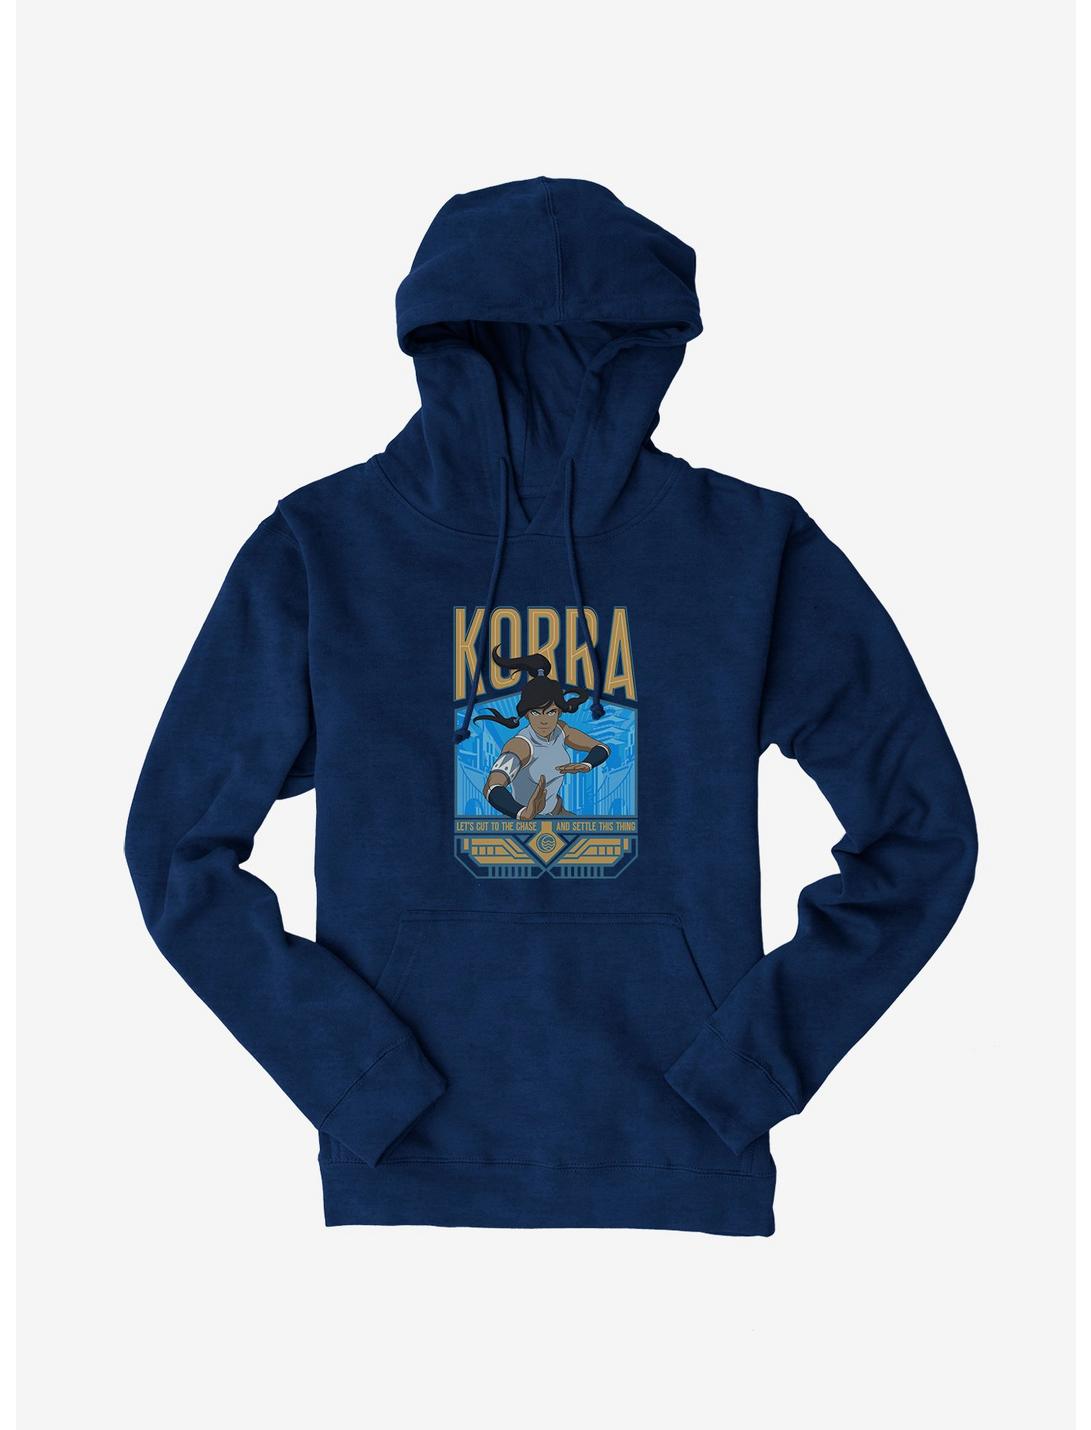 Legend Of Korra Cut To The Chase Hoodie, NAVY, hi-res